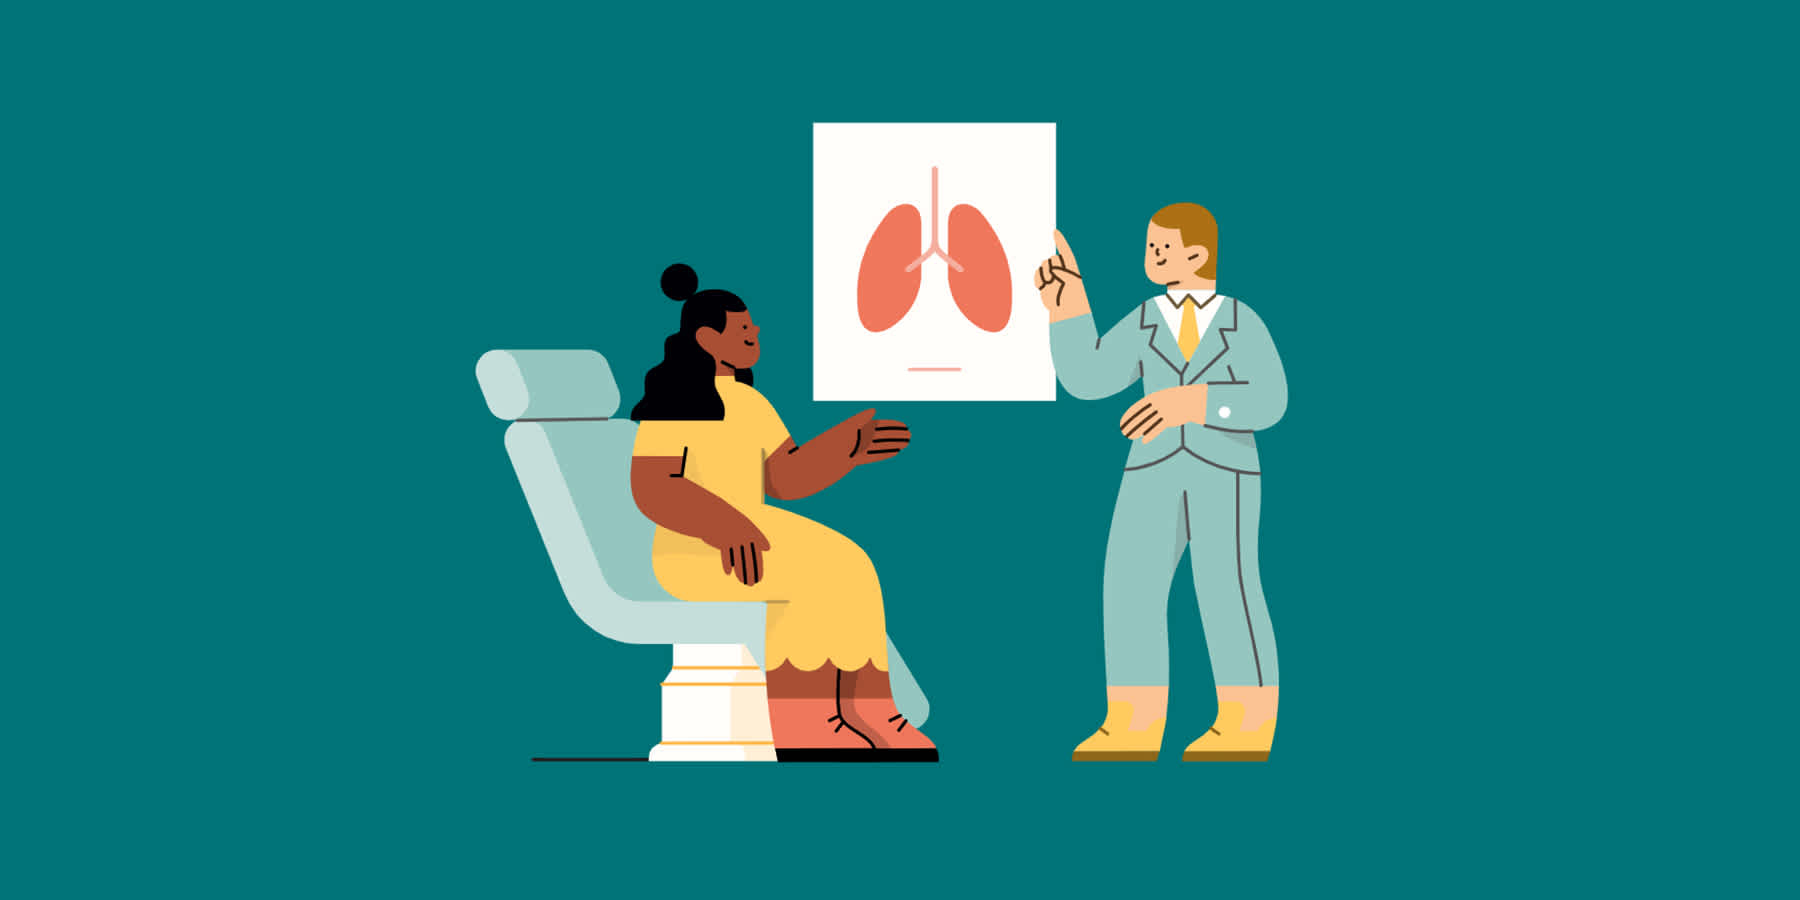 Illustration showing two people discussing health inequity in regards to black history month. 